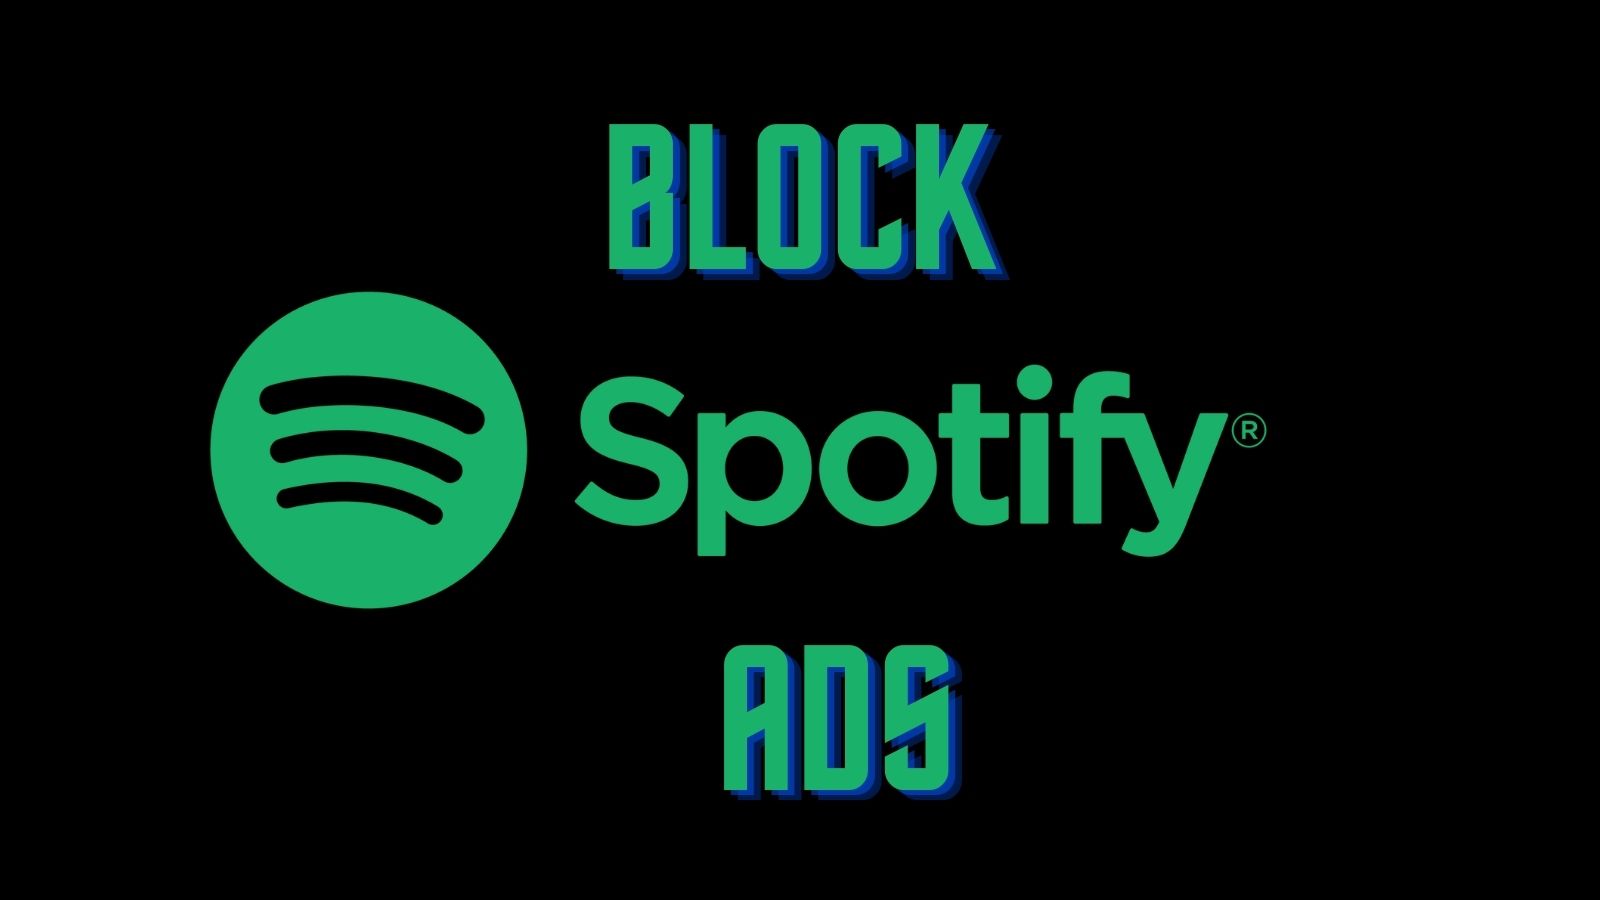 How To Skip Or Block Spotify Ads Easily? (Free & Legal)